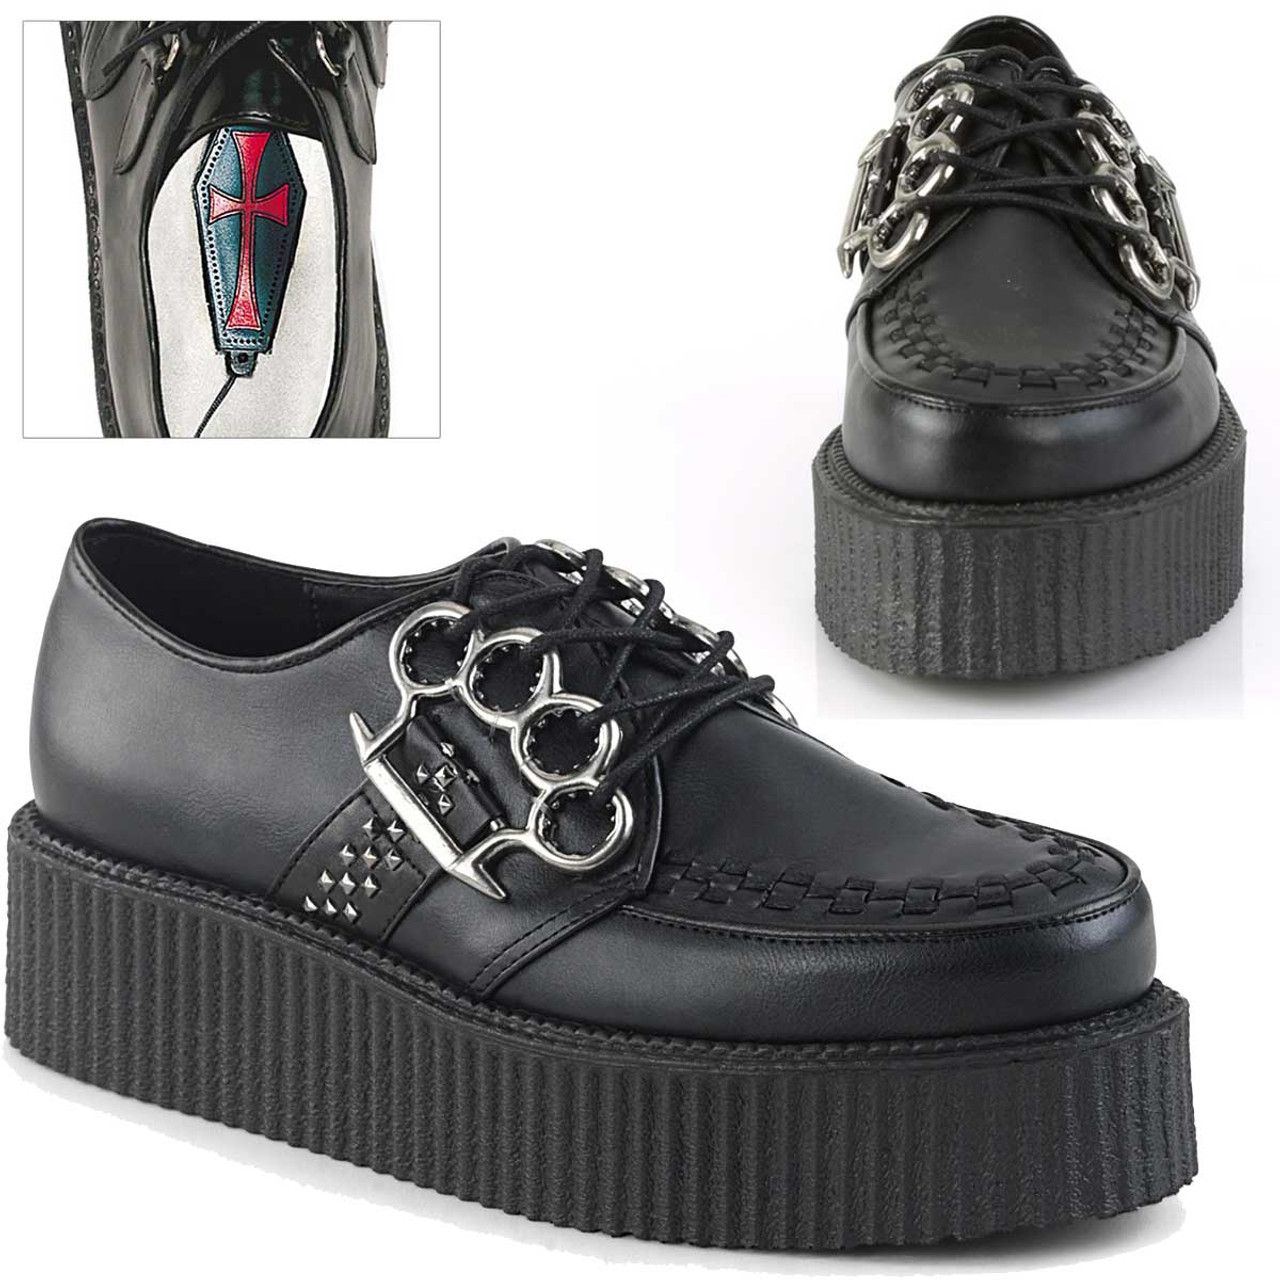 oxford creepers